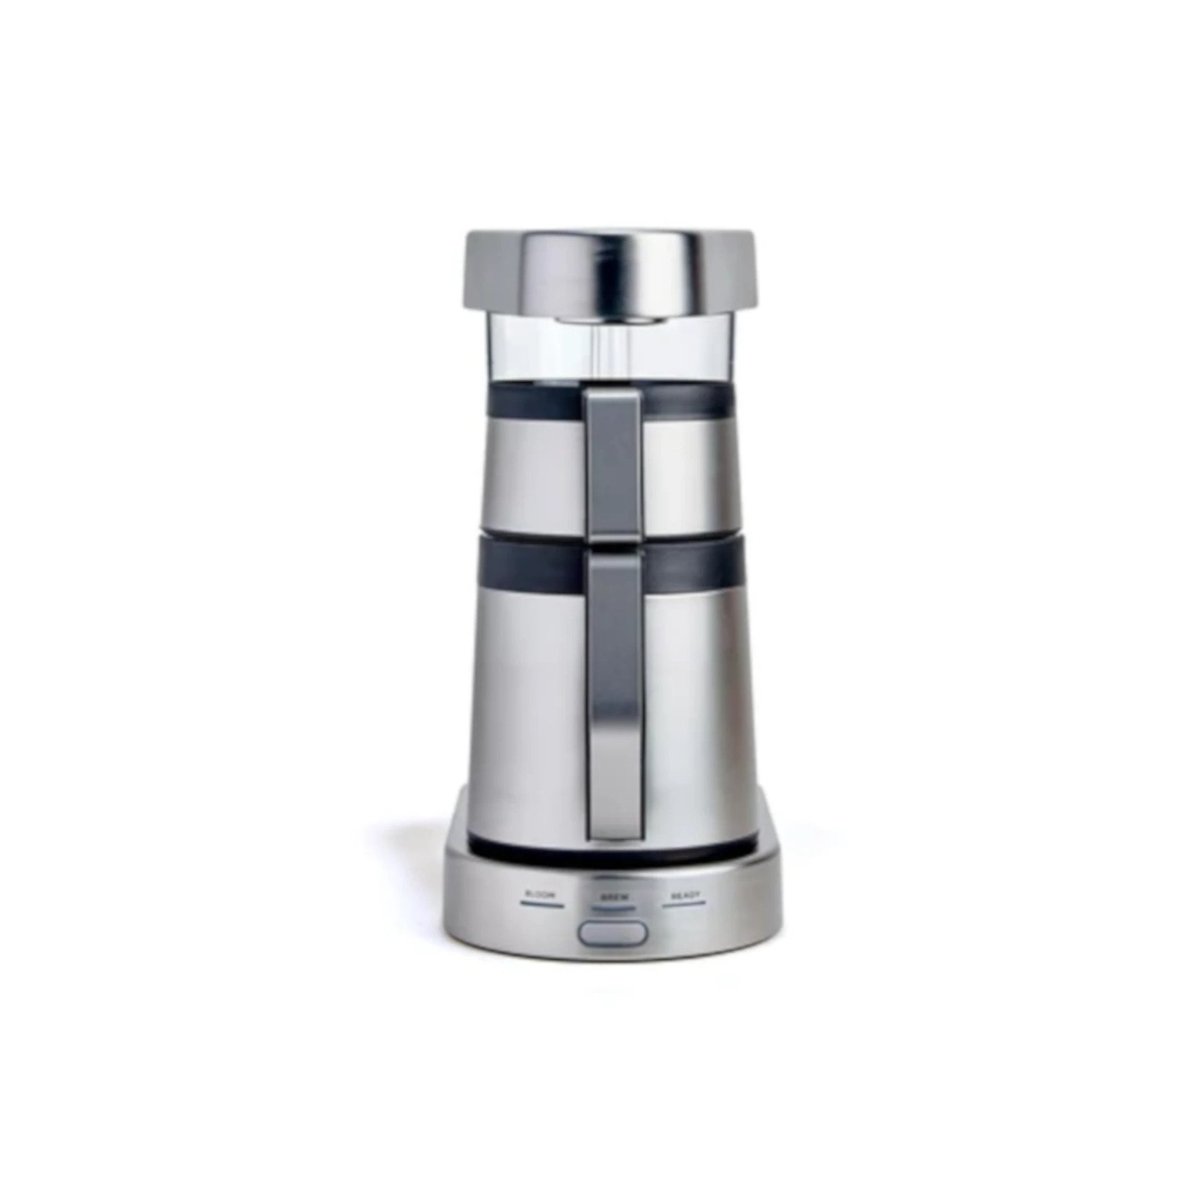 GotoPopupYYC - Ratio Six - Ultimate Electric Coffee Maker -R6-SS